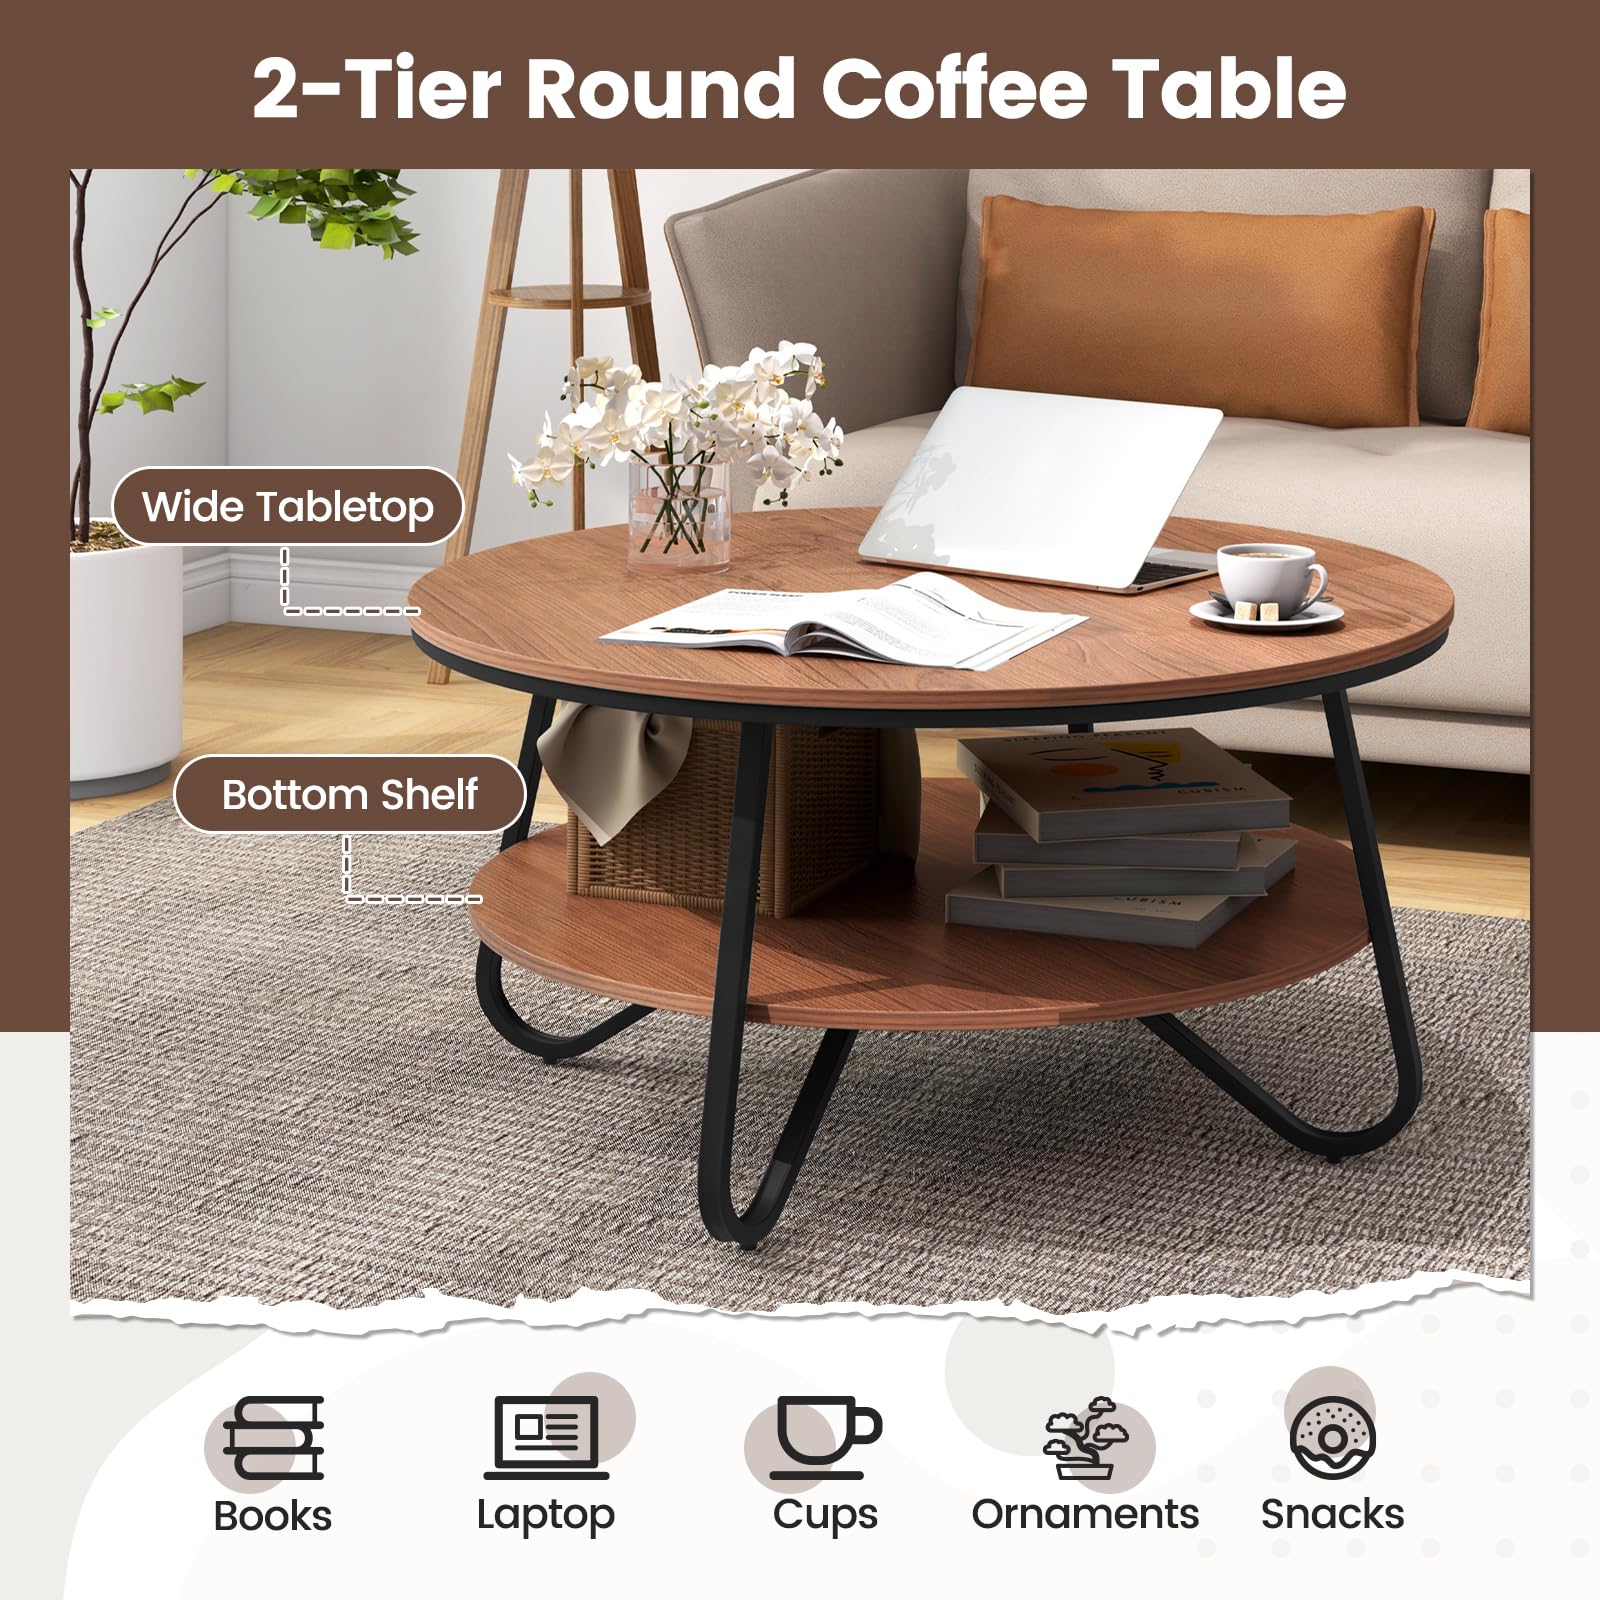 Giantex 2-Tier Round Coffee Table, 33.5" Wood Coffee Table with Open Storage Shelf